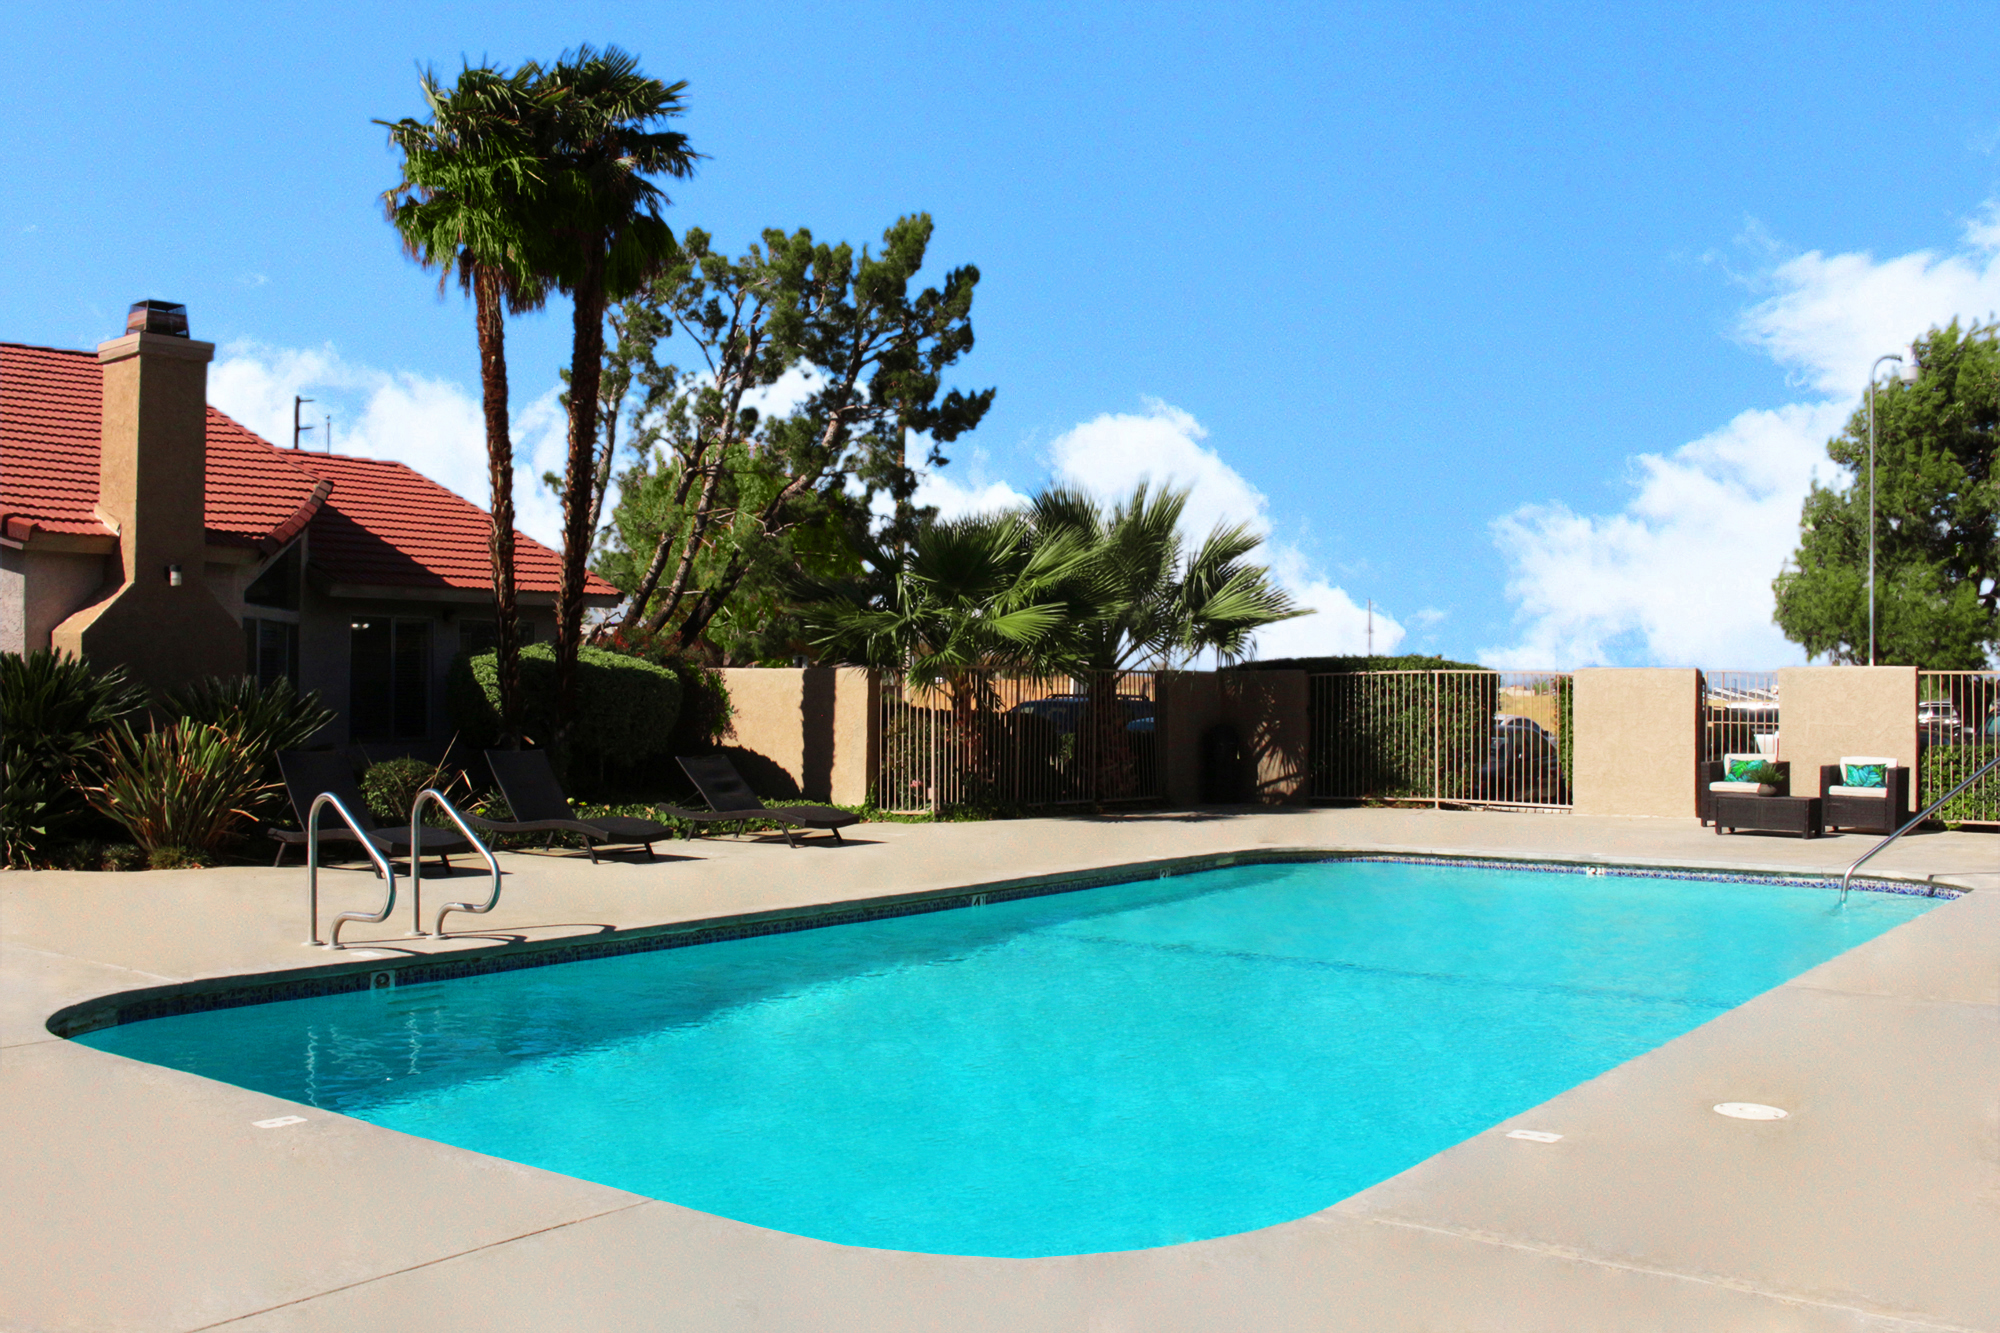 This banner image shows the swimming pool of Ridgeview Village Apartments.